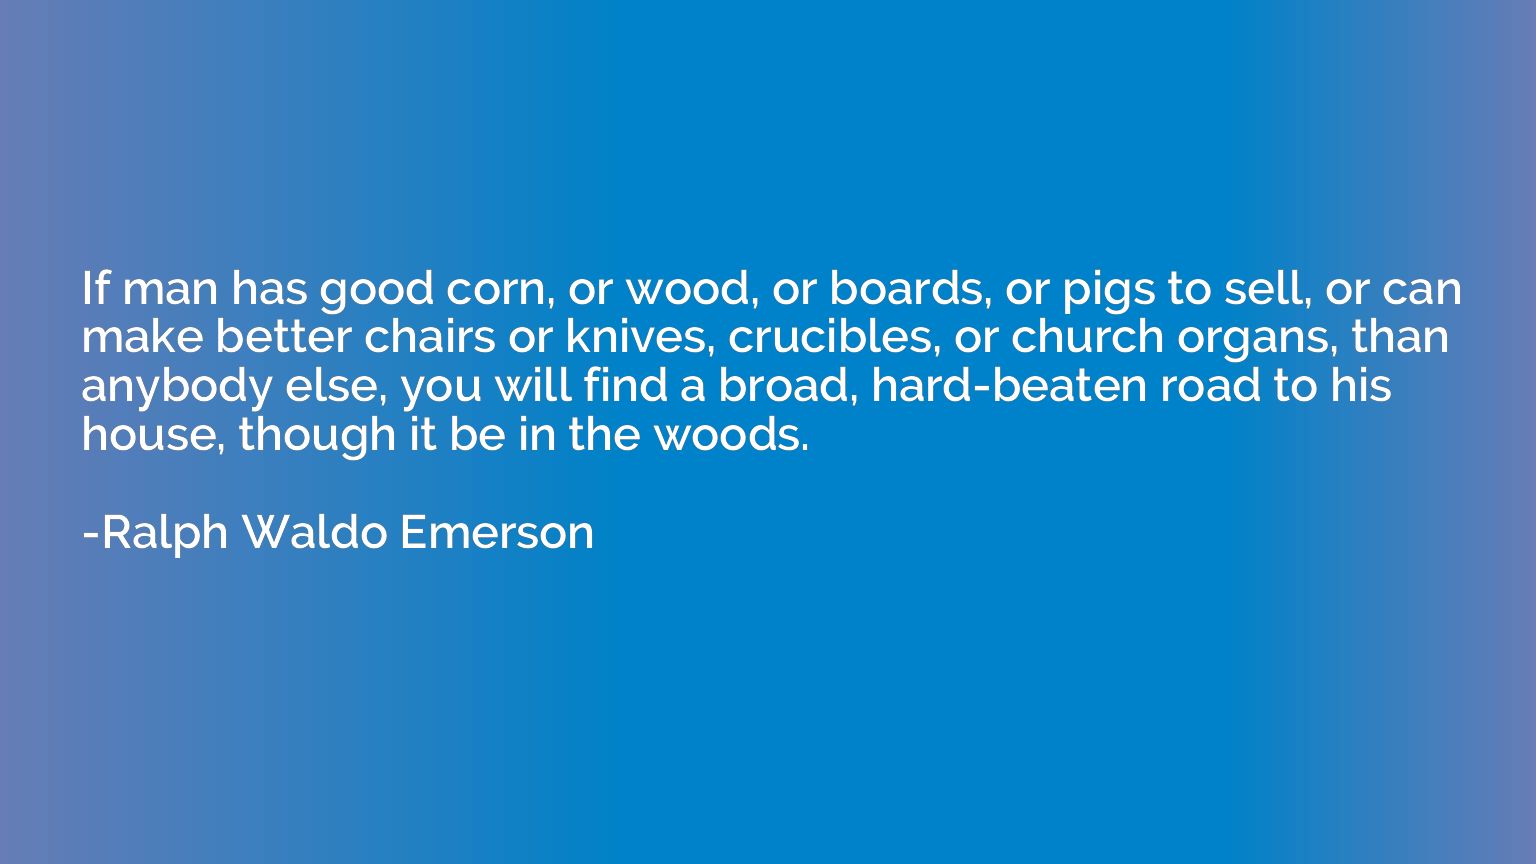 If man has good corn, or wood, or boards, or pigs to sell, o